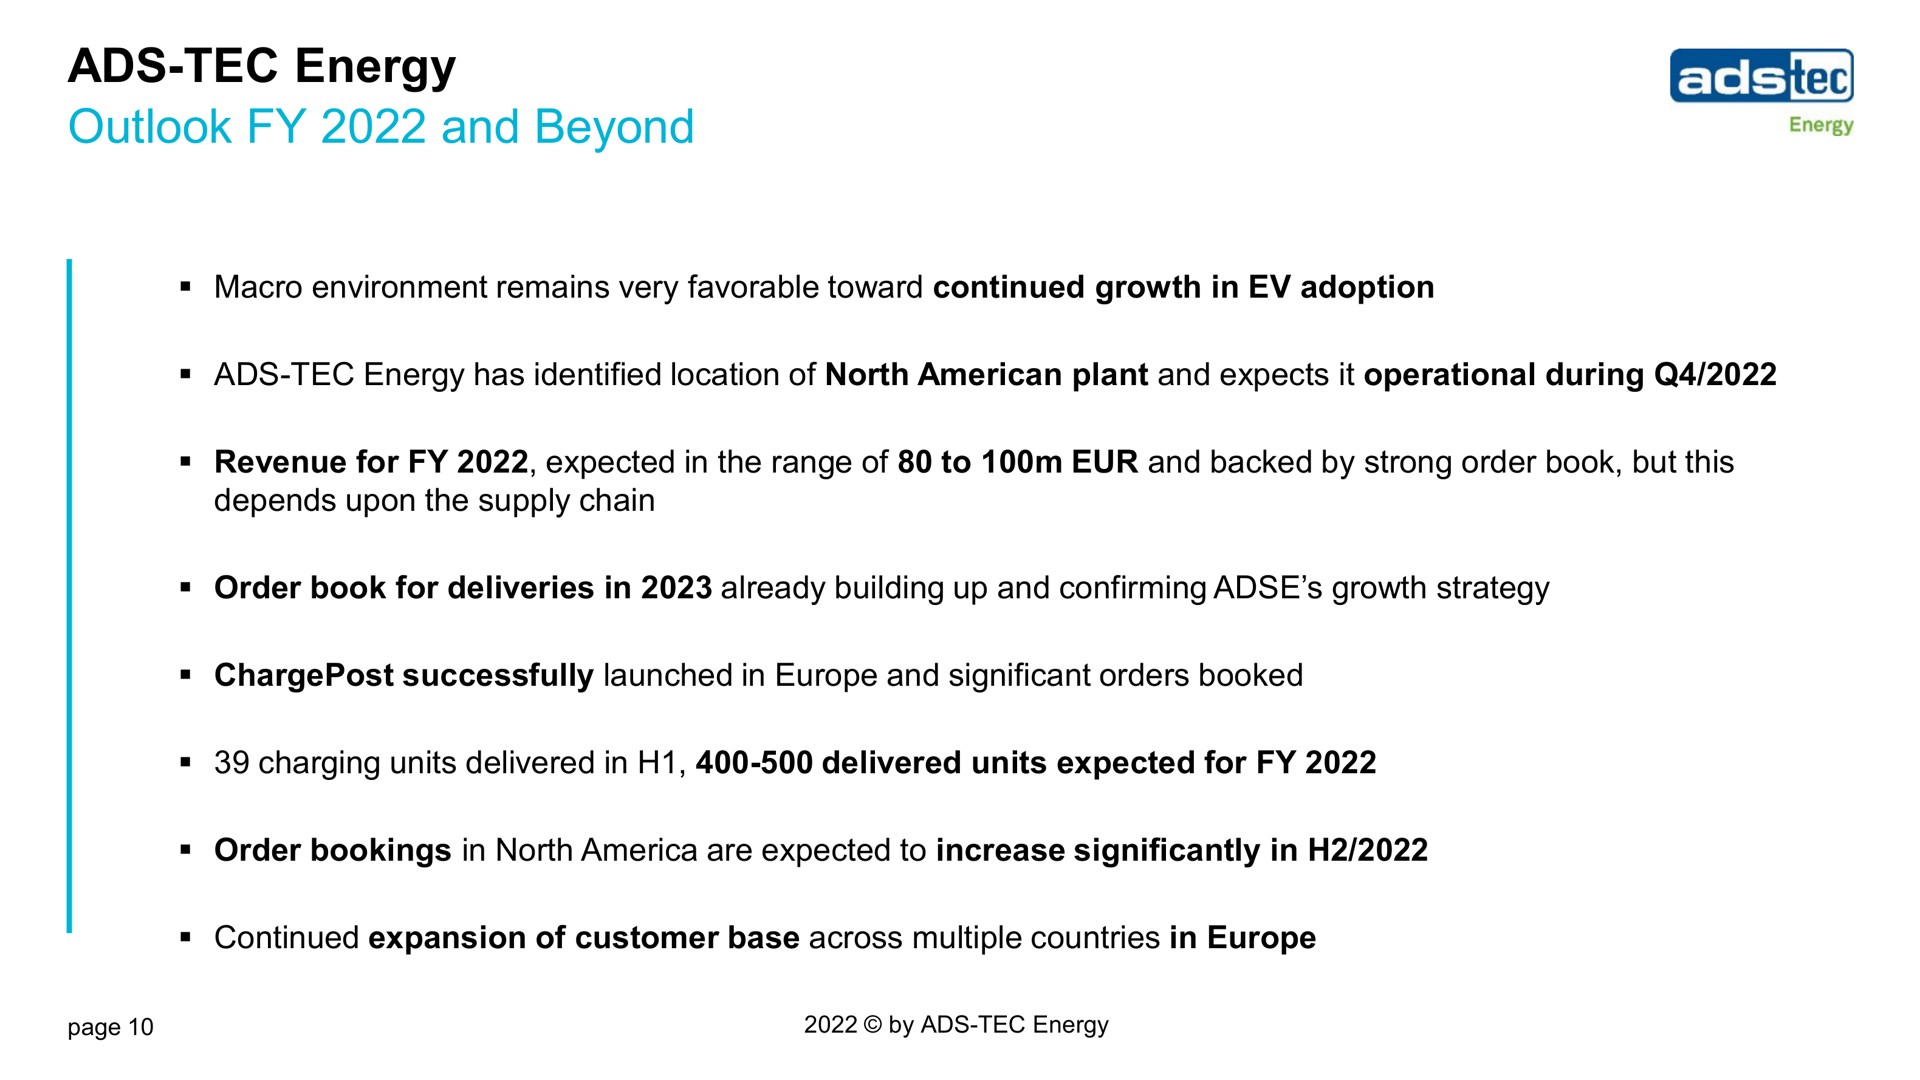 ads tec energy outlook and beyond | ads-tec Energy